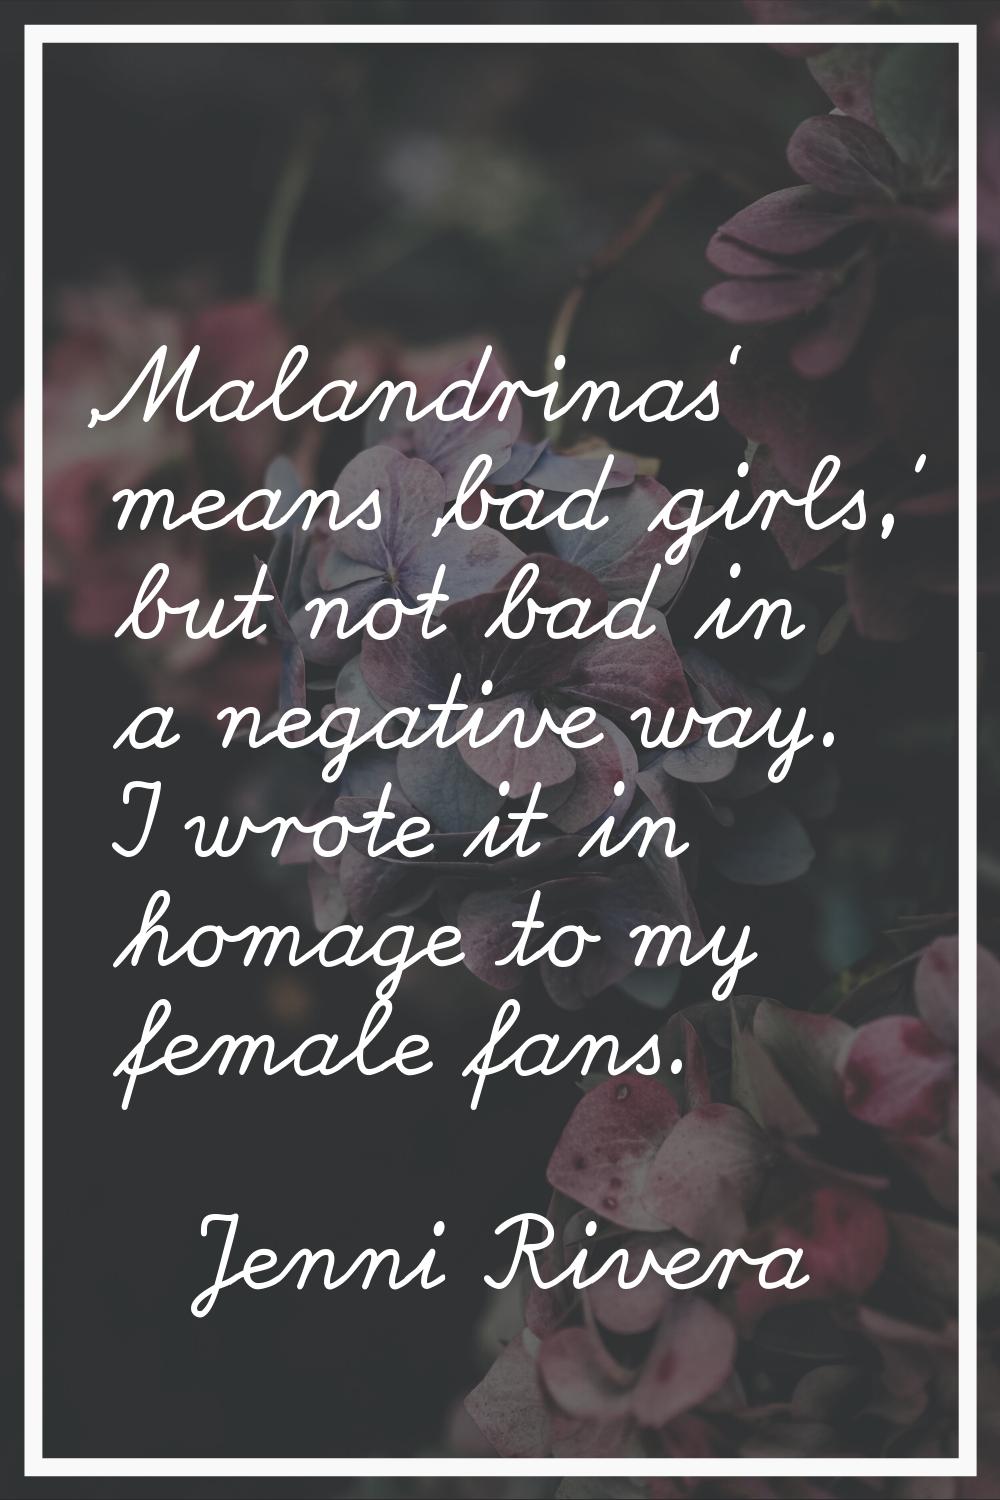 'Malandrinas' means 'bad girls,' but not bad in a negative way. I wrote it in homage to my female f